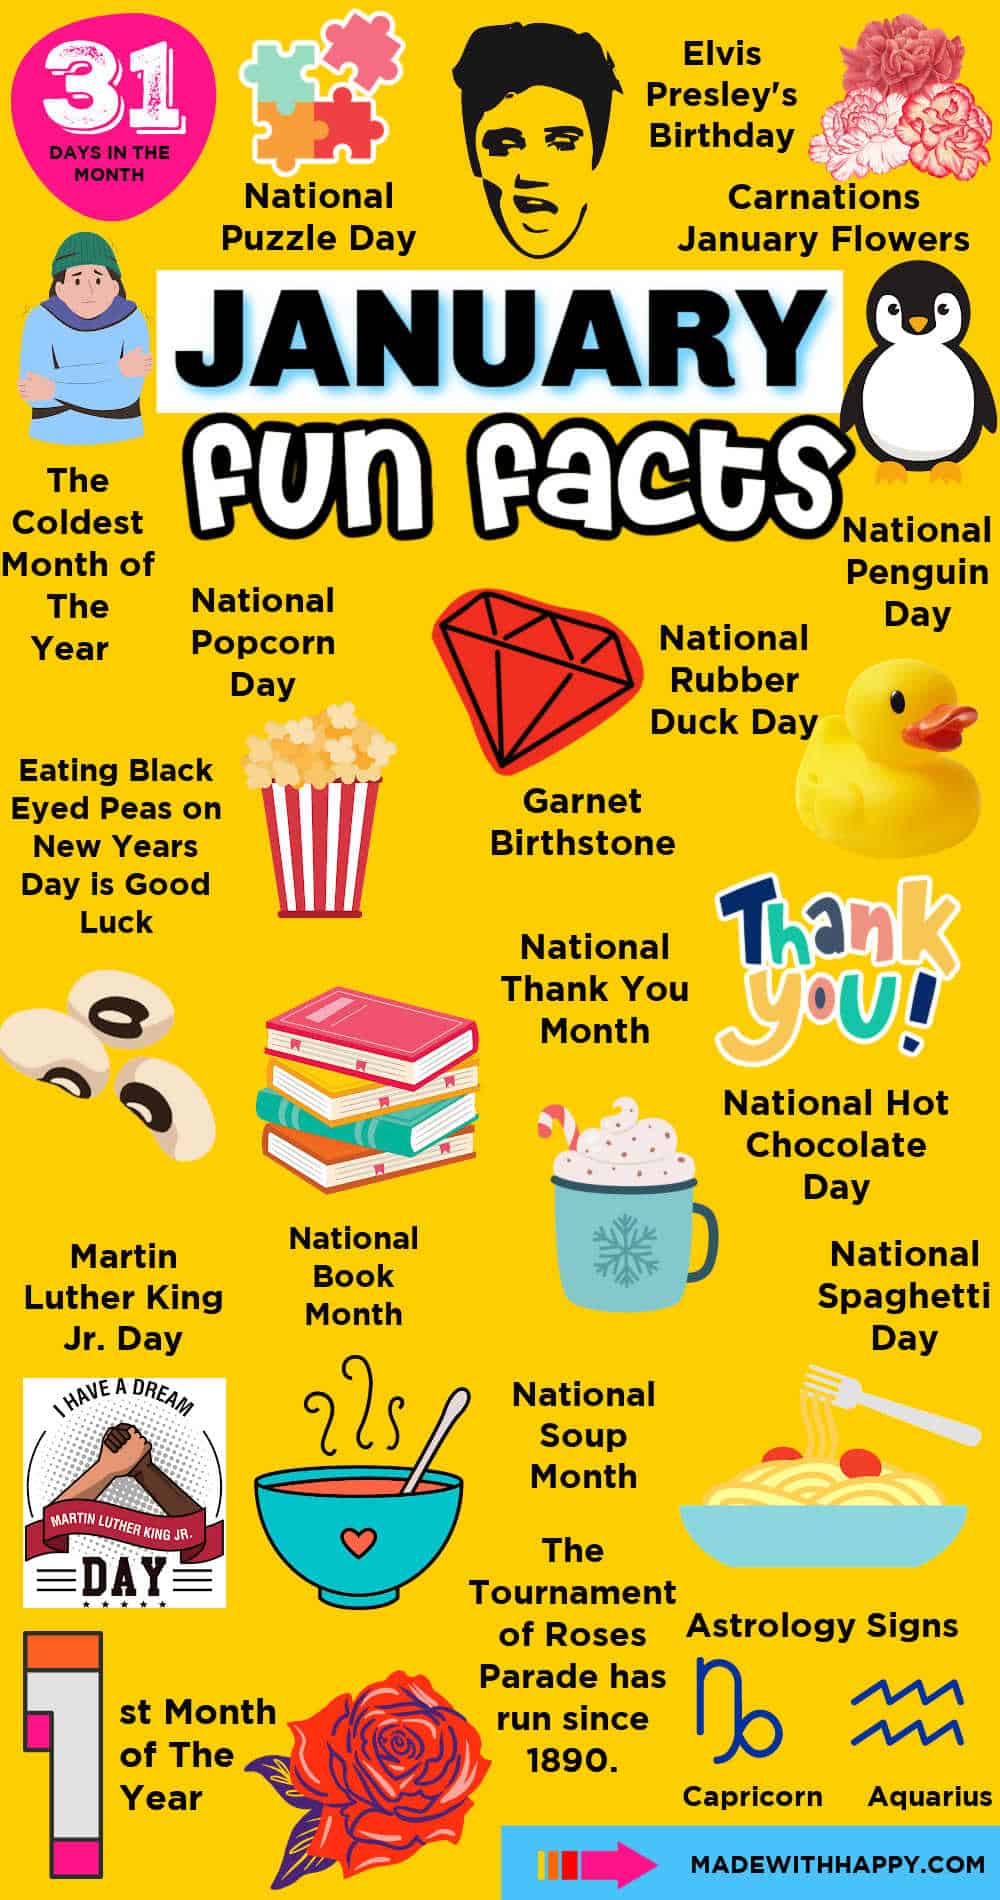 January Fun Facts Made with HAPPY